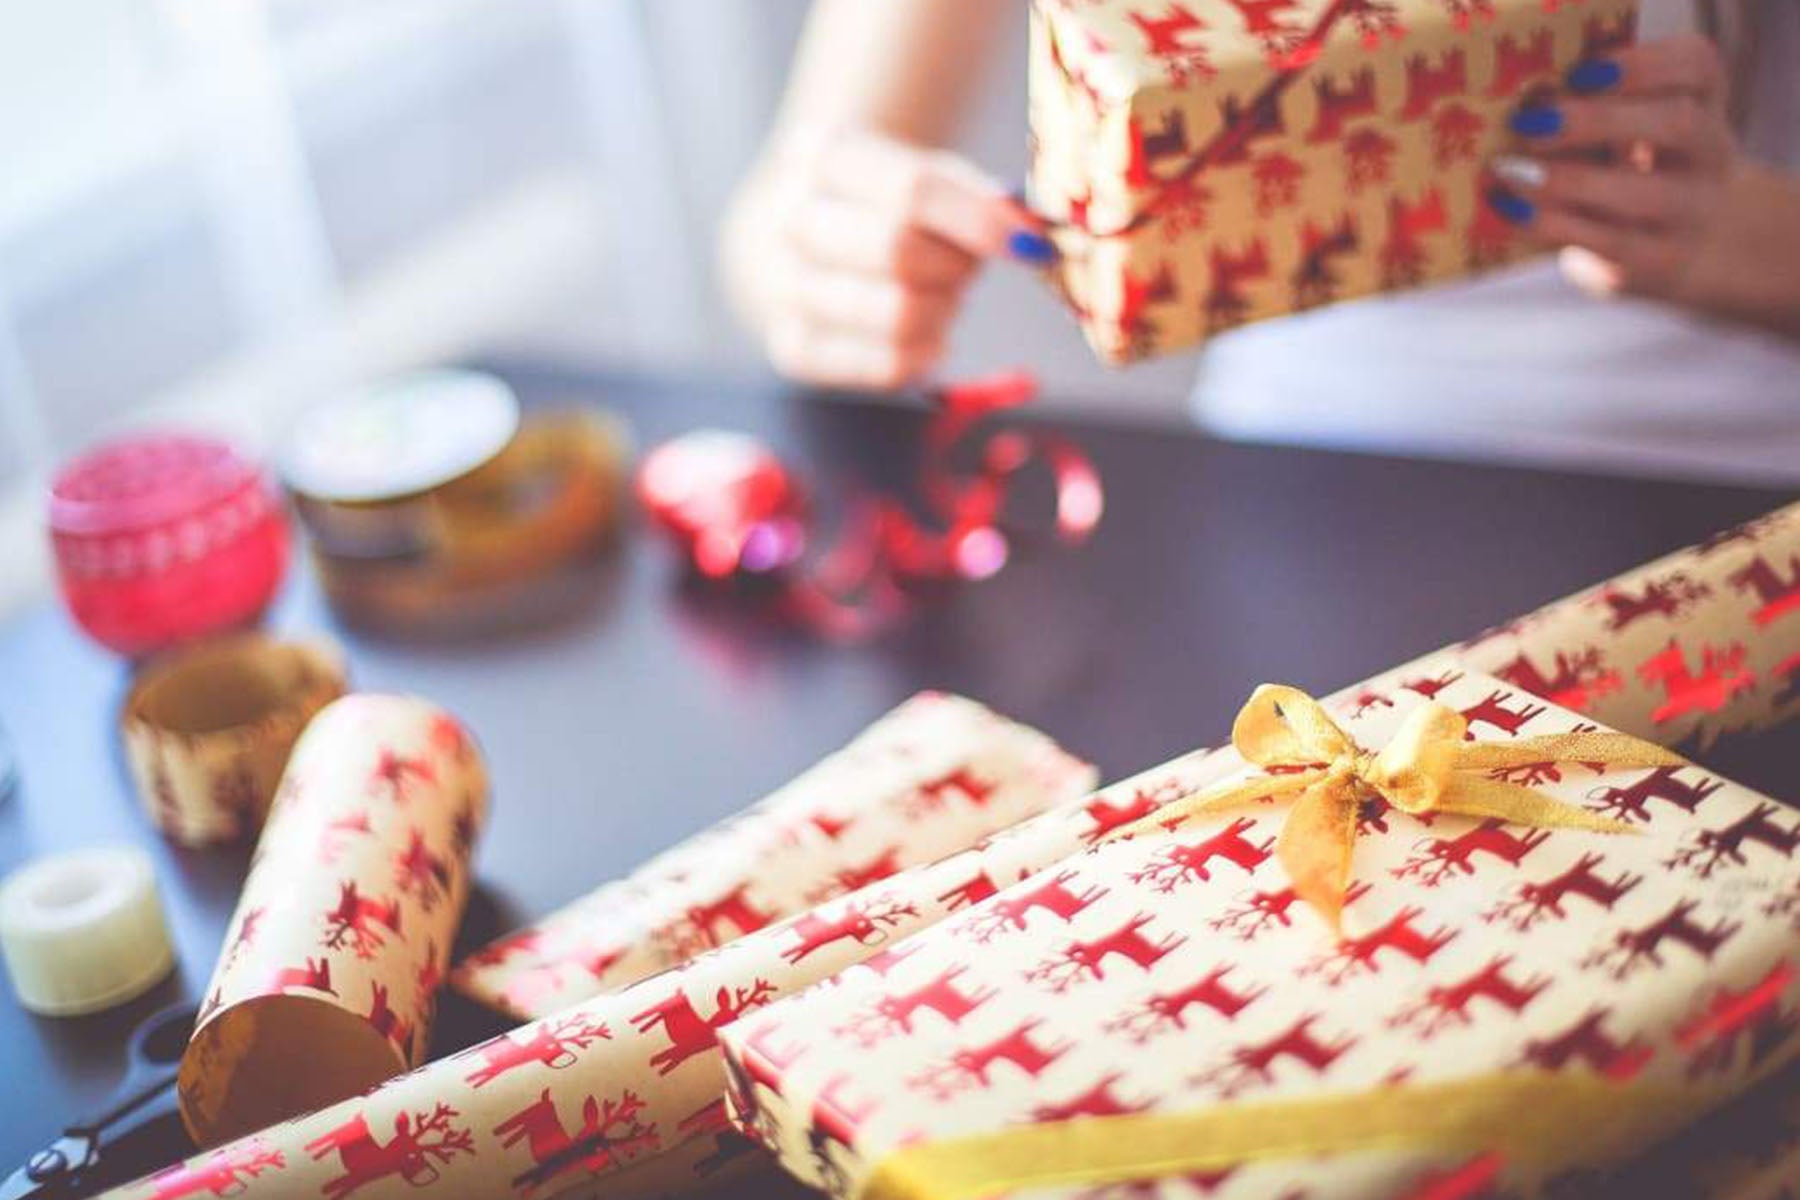 person wrapping gifts